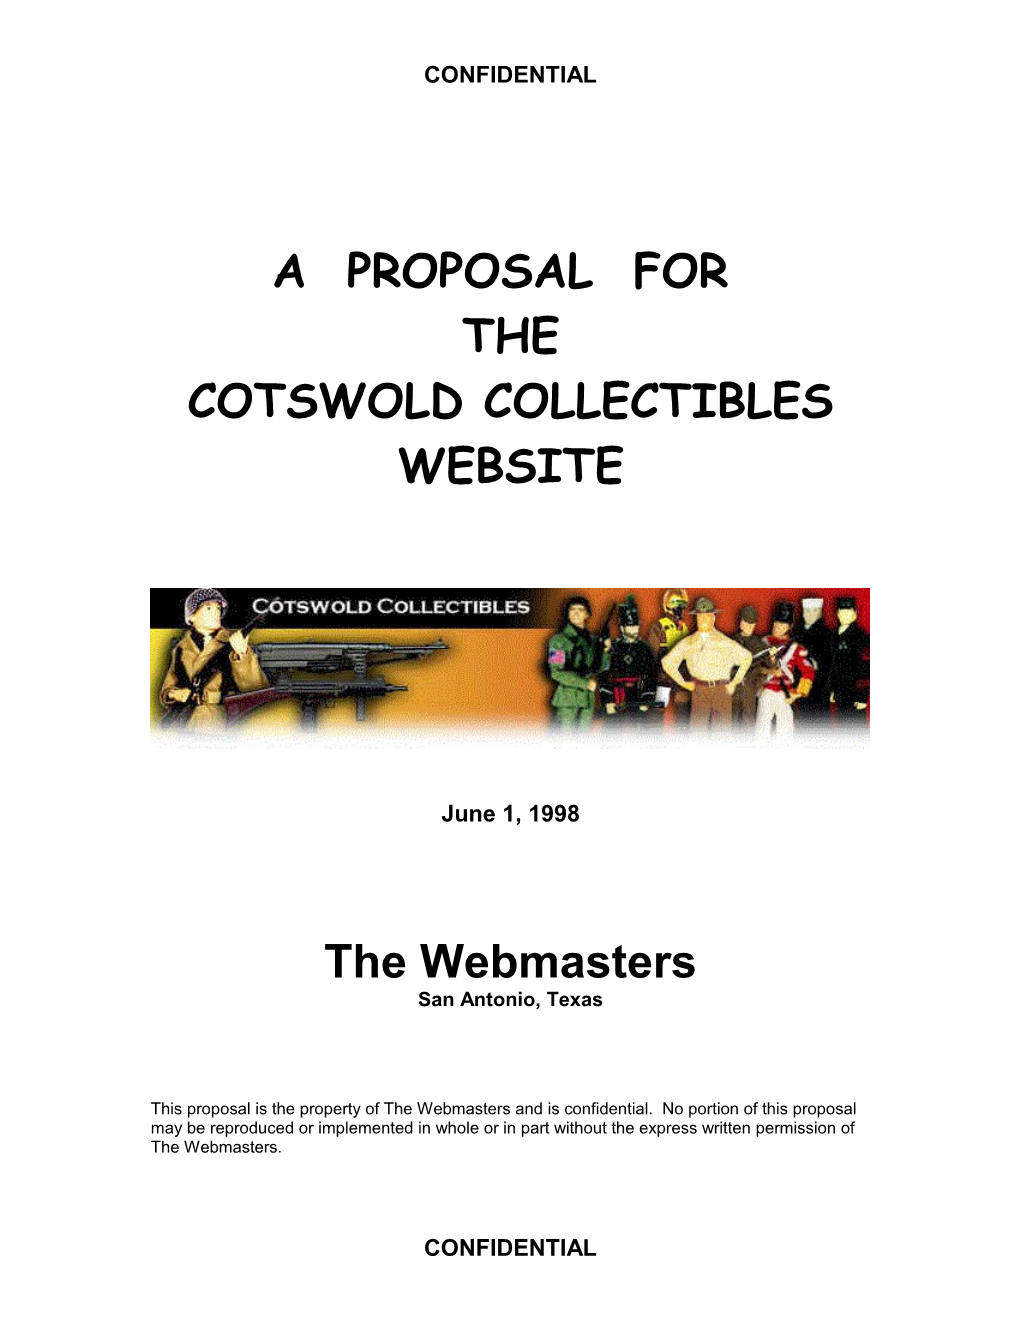 Cotswold Collectibles Website